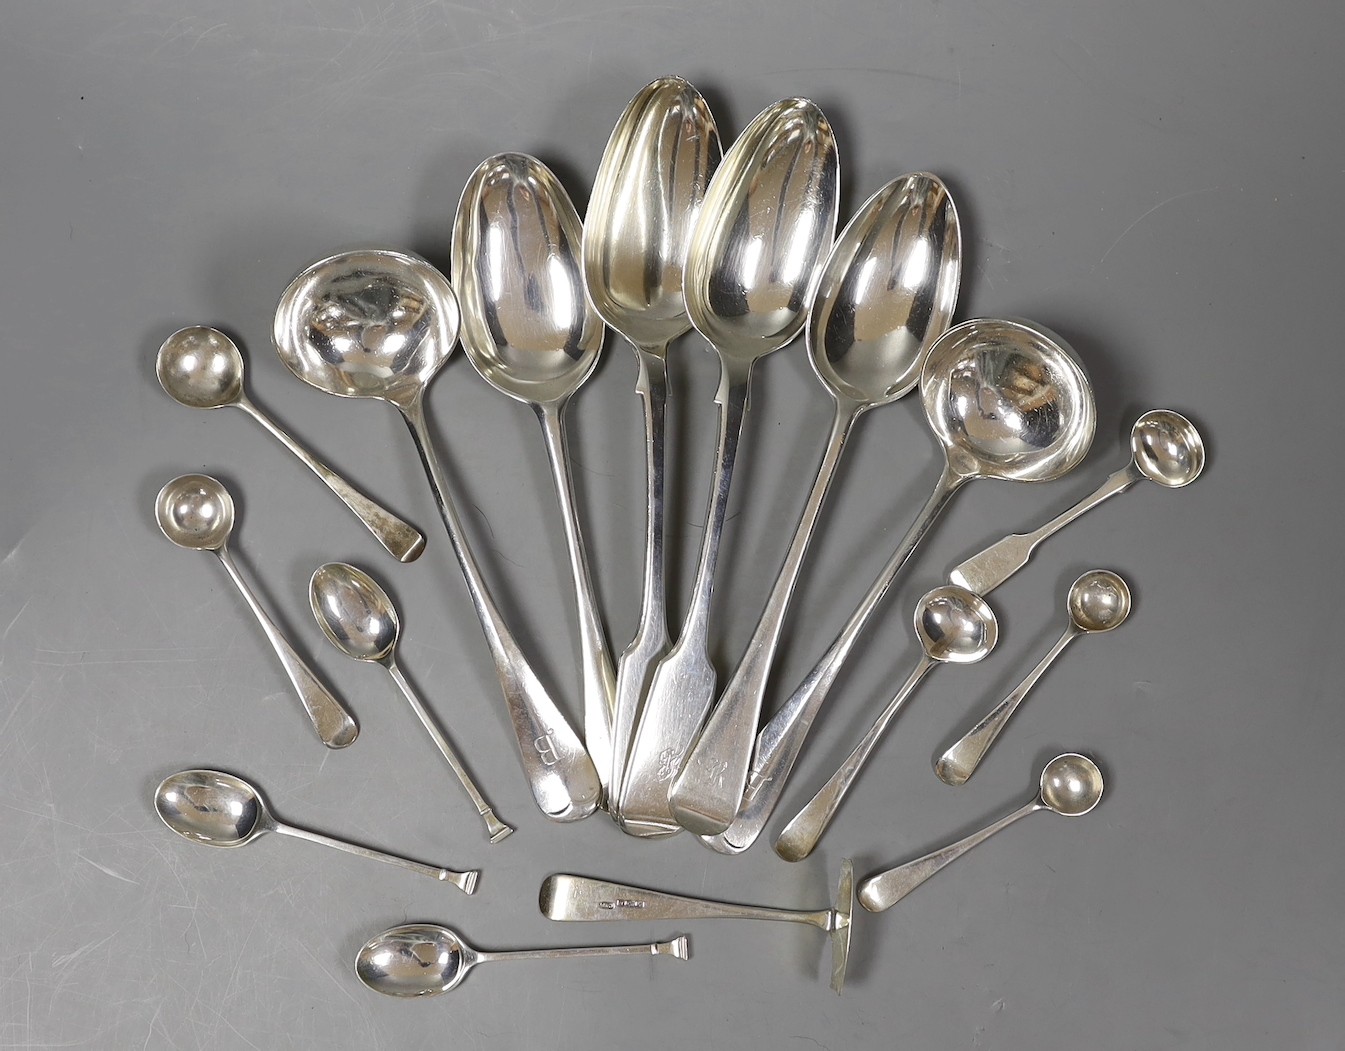 A pair of early Victorian silver fiddle pattern table spoons, William Eaton, London, 1840, a pair of later silver rat-tail sauce ladles by Walker & Hall, Sheffield, 1902 and a small quantity of assorted minor silver flat